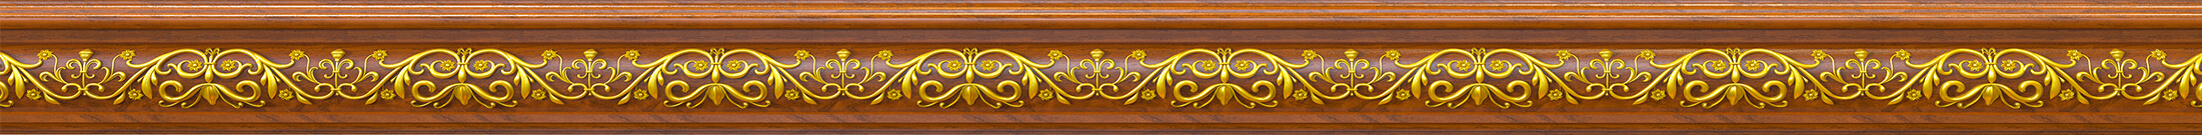 Thick wood trim with inlayed gold decoration